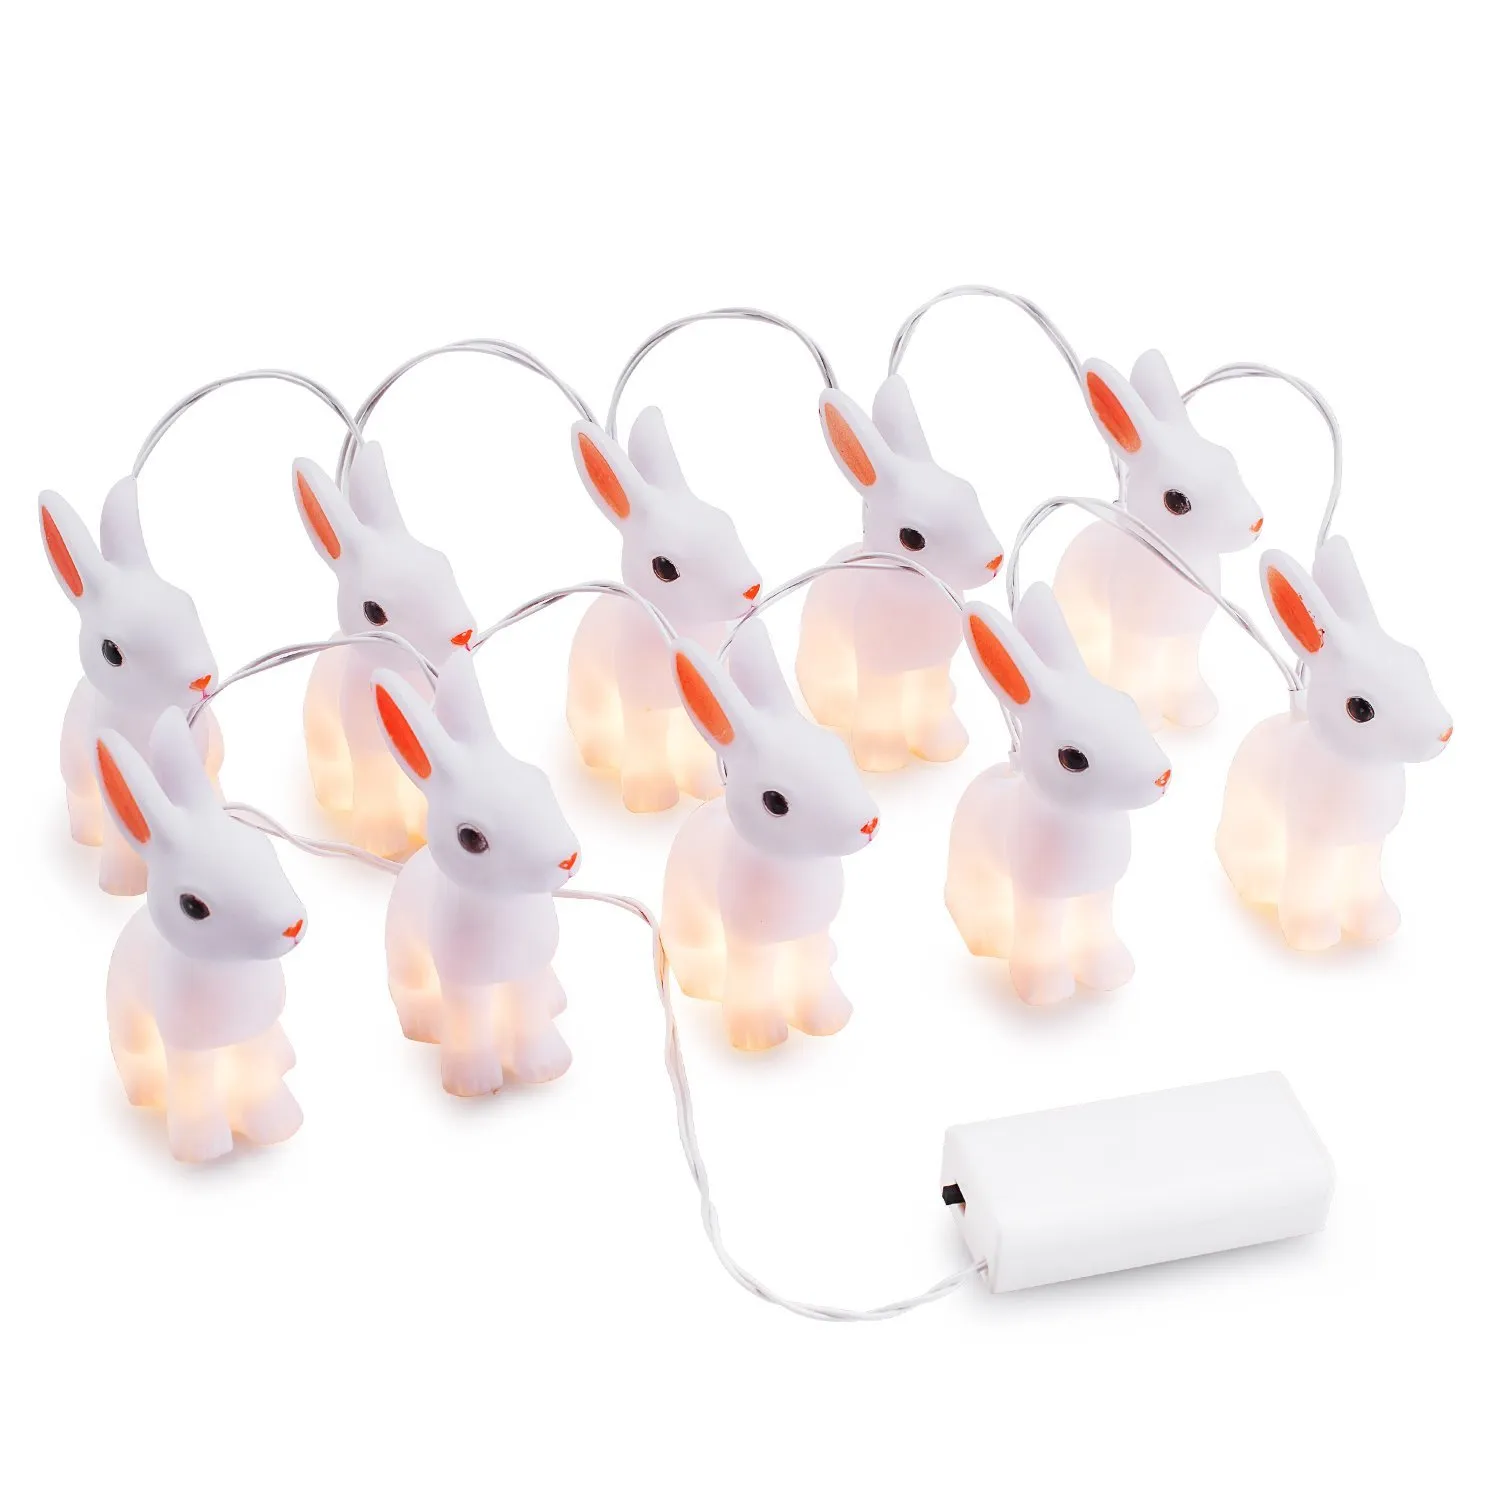 LED Strings Battery Operated 10 LEDs Indoor Easter Decorative Bunny String Lights holiday and lighting